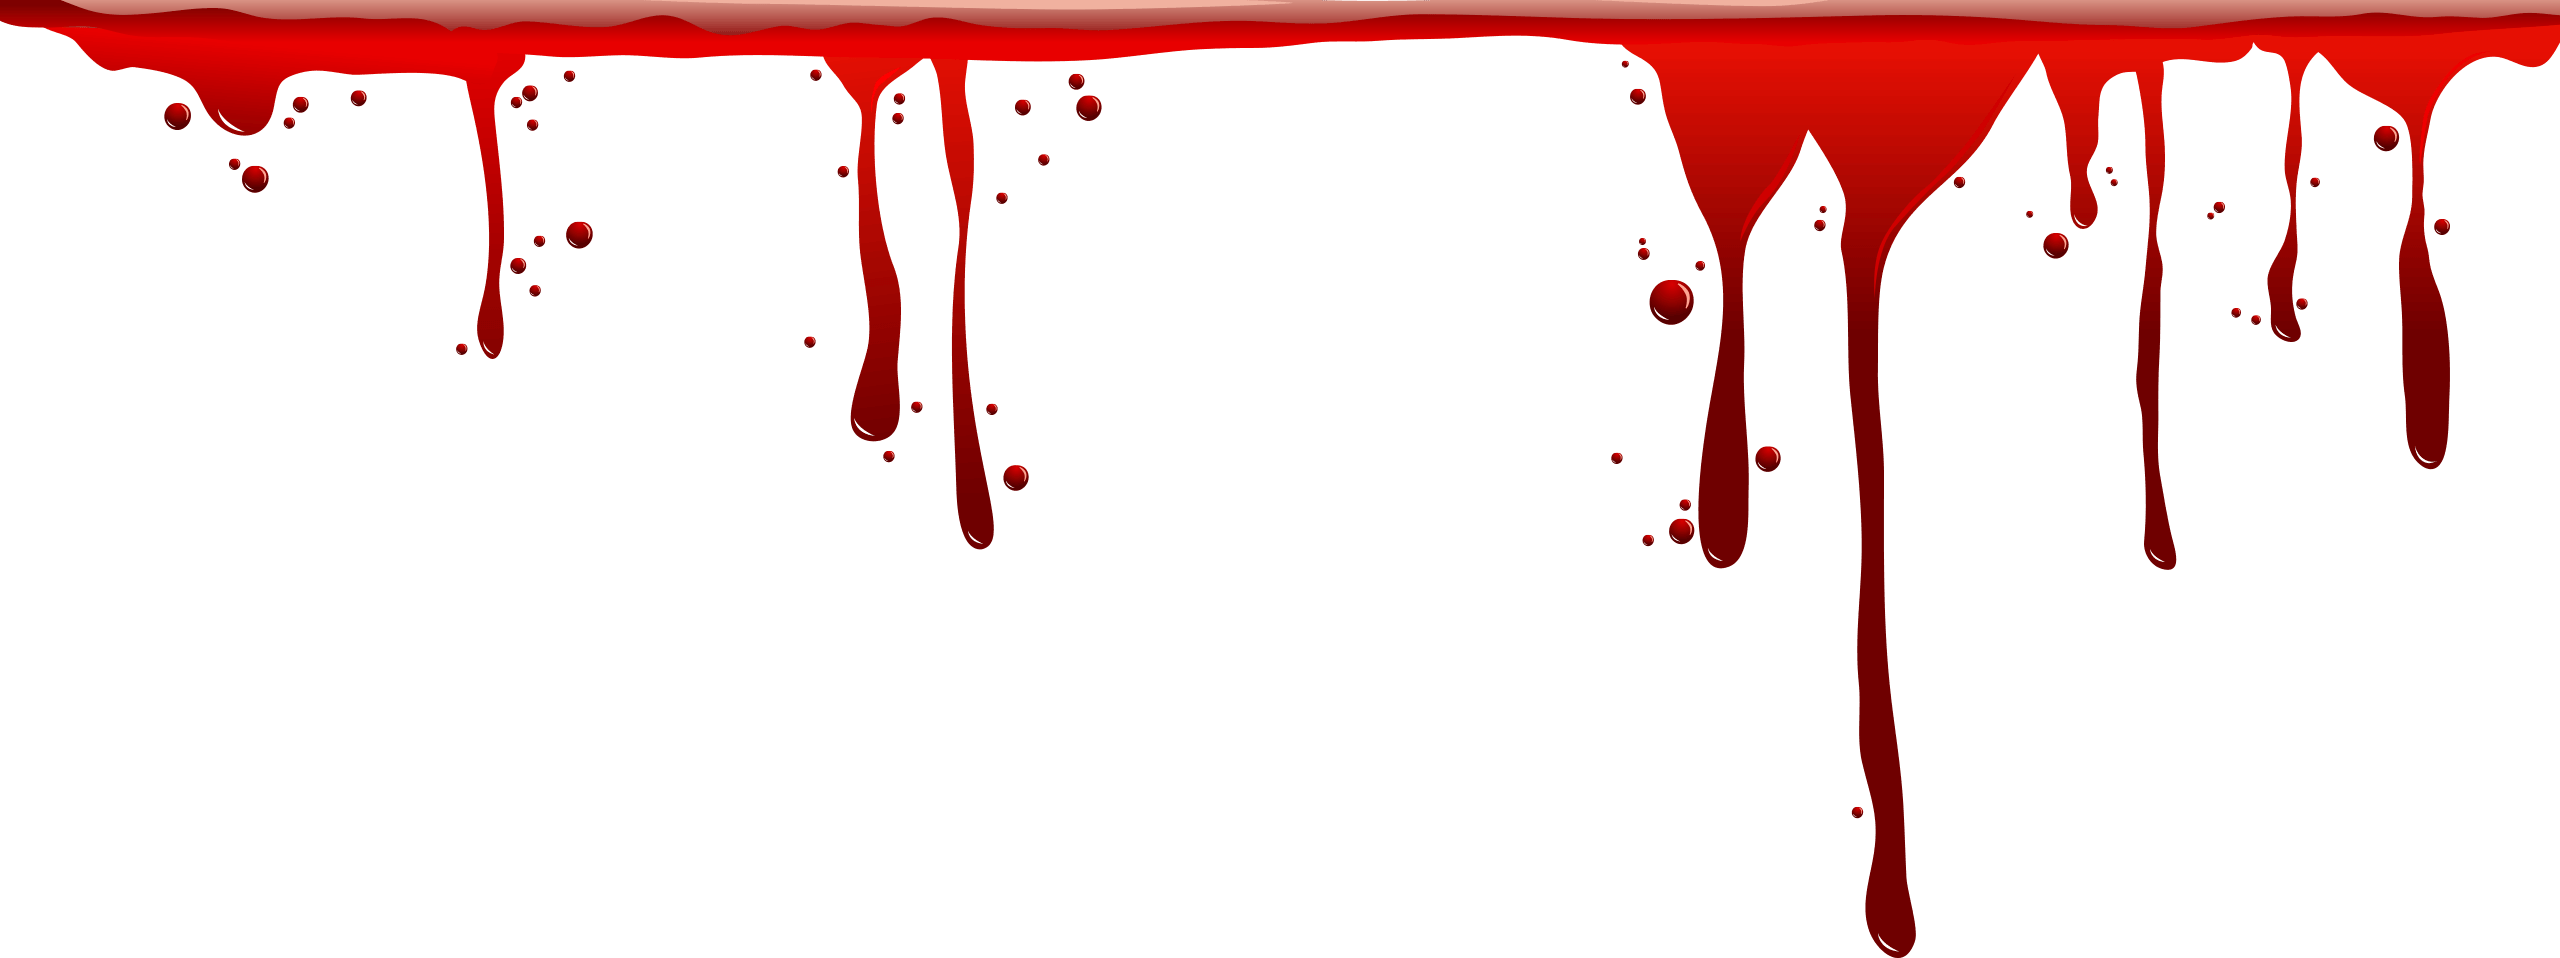 Realistic Dripping Blood Png With Transparent Background  Blood Dripping  Drawing Transparent PNG  800x600  Free Download on NicePNG